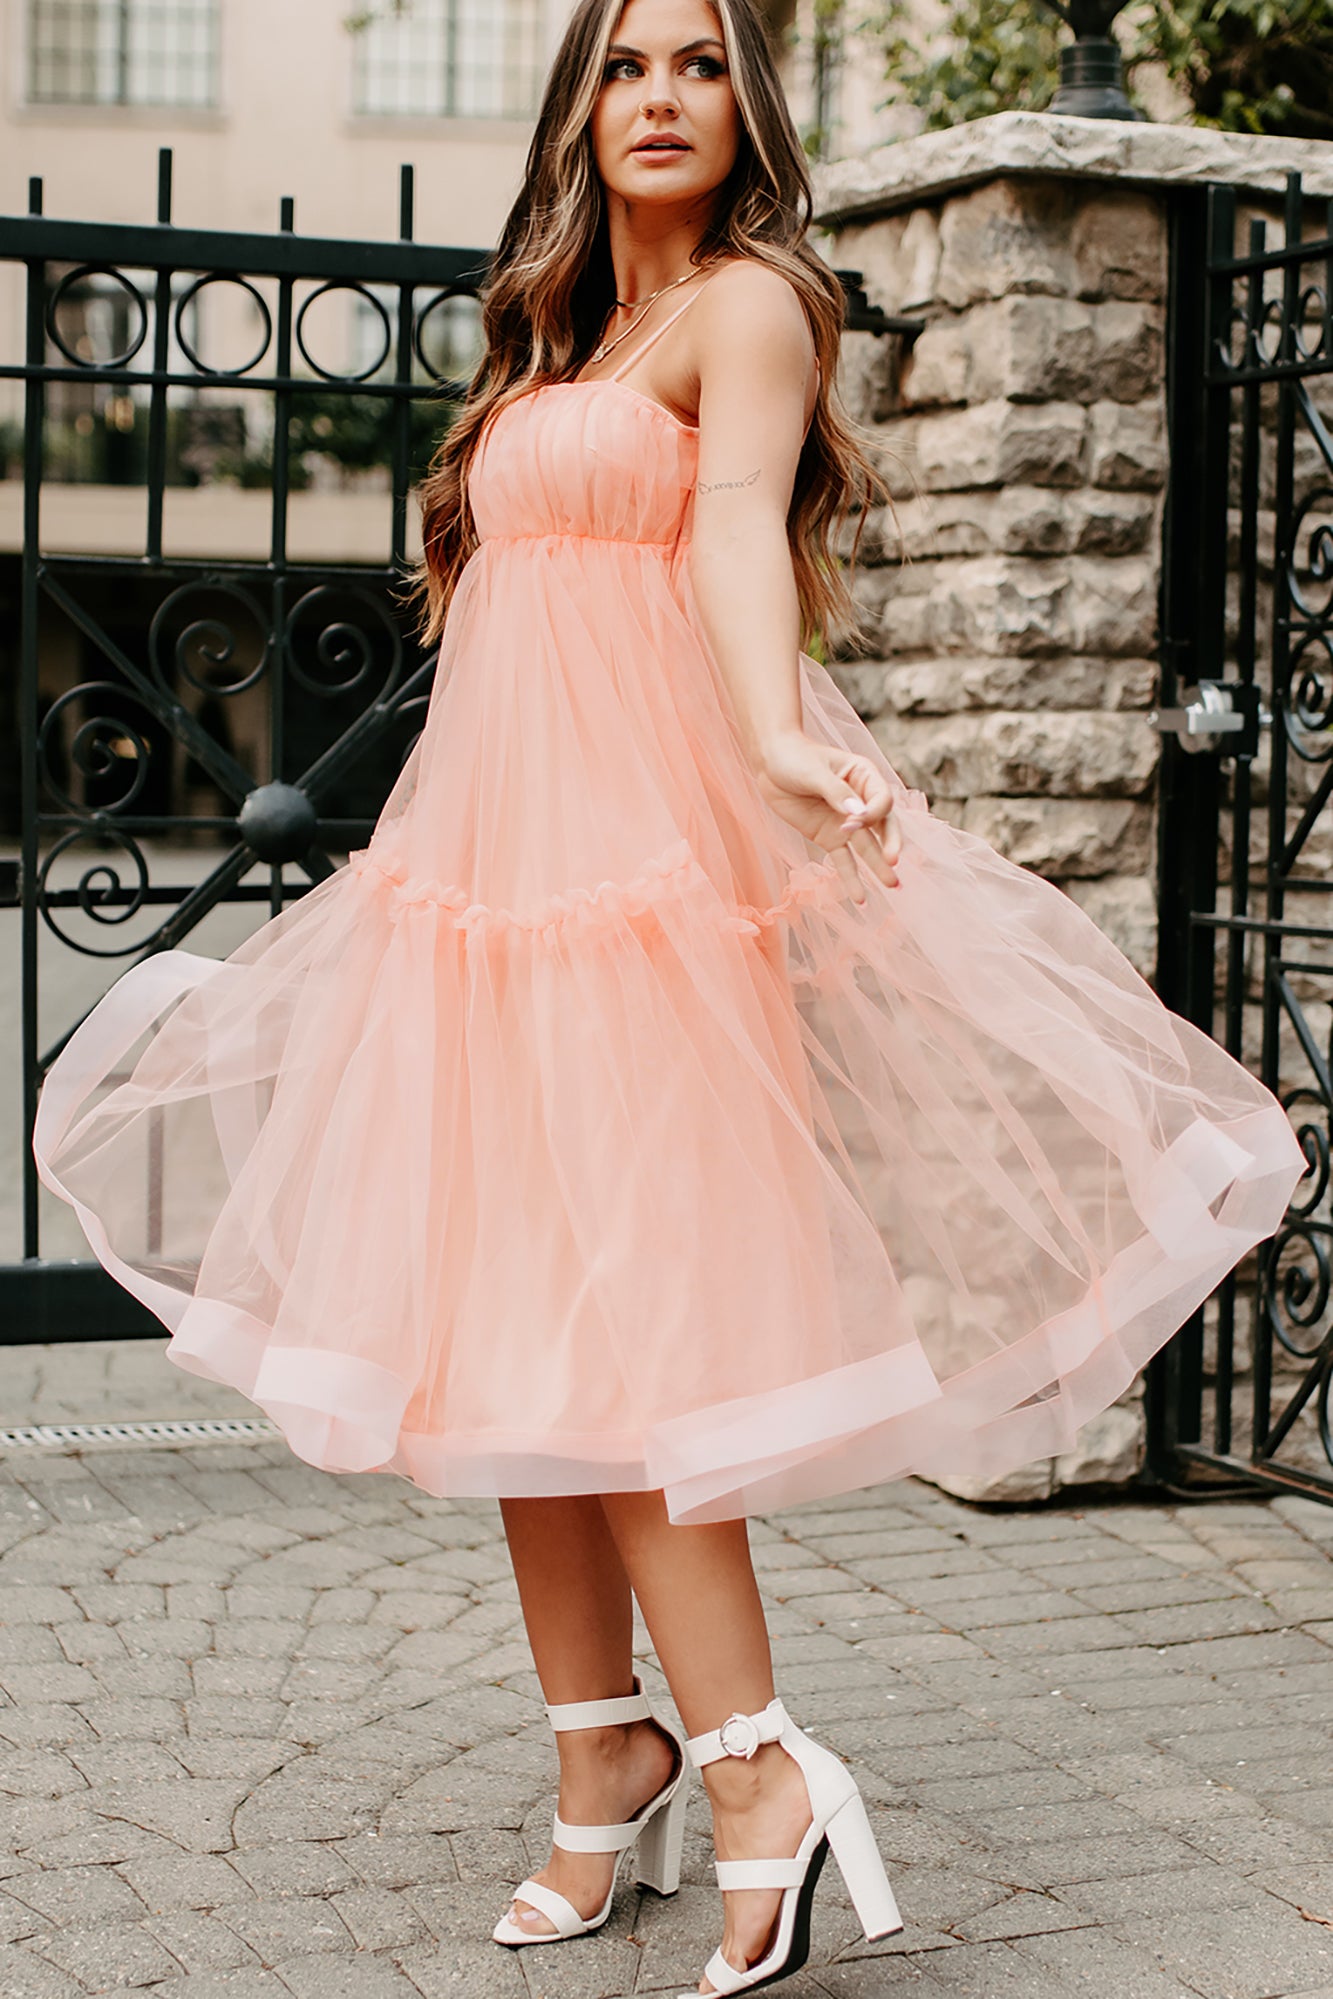 One to Remember Blush Pink Tie-Strap Tiered Babydoll Dress